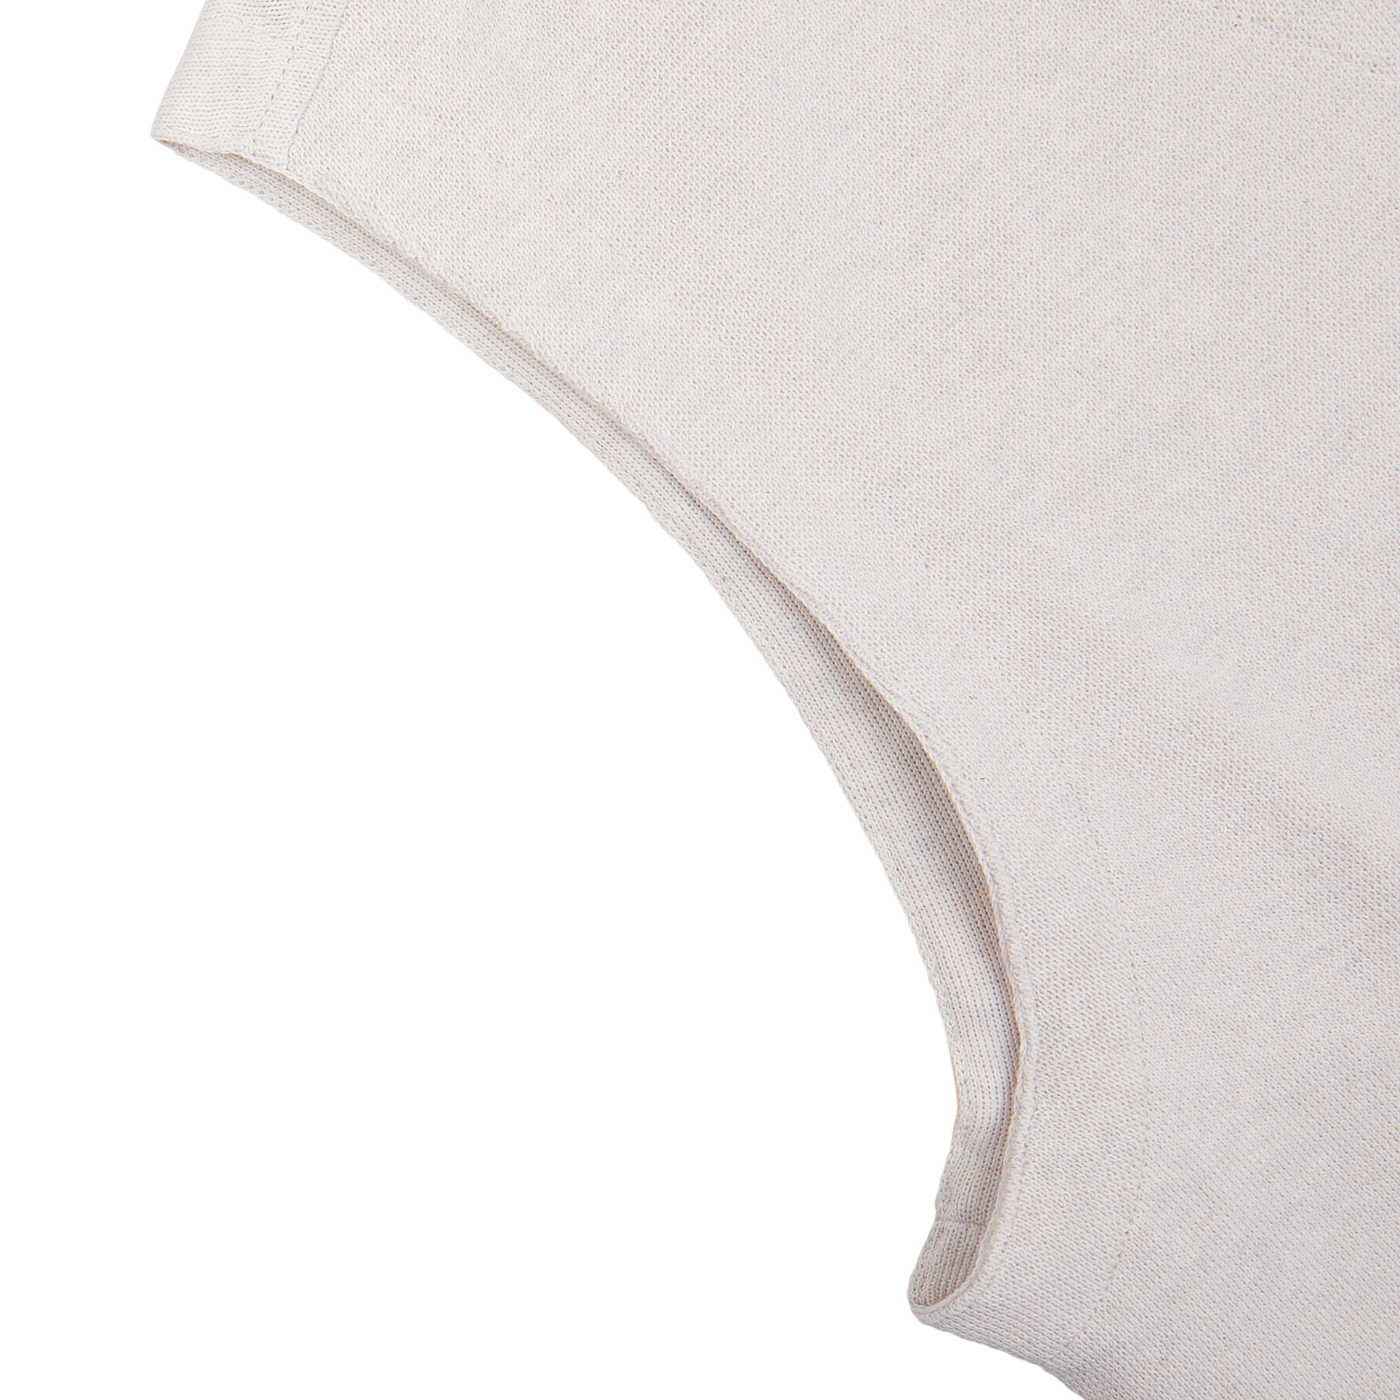 A close-up of a Light Beige Fresh Cotton Knitted Waistcoat edge with neat stitching on a white surface by Gran Sasso.